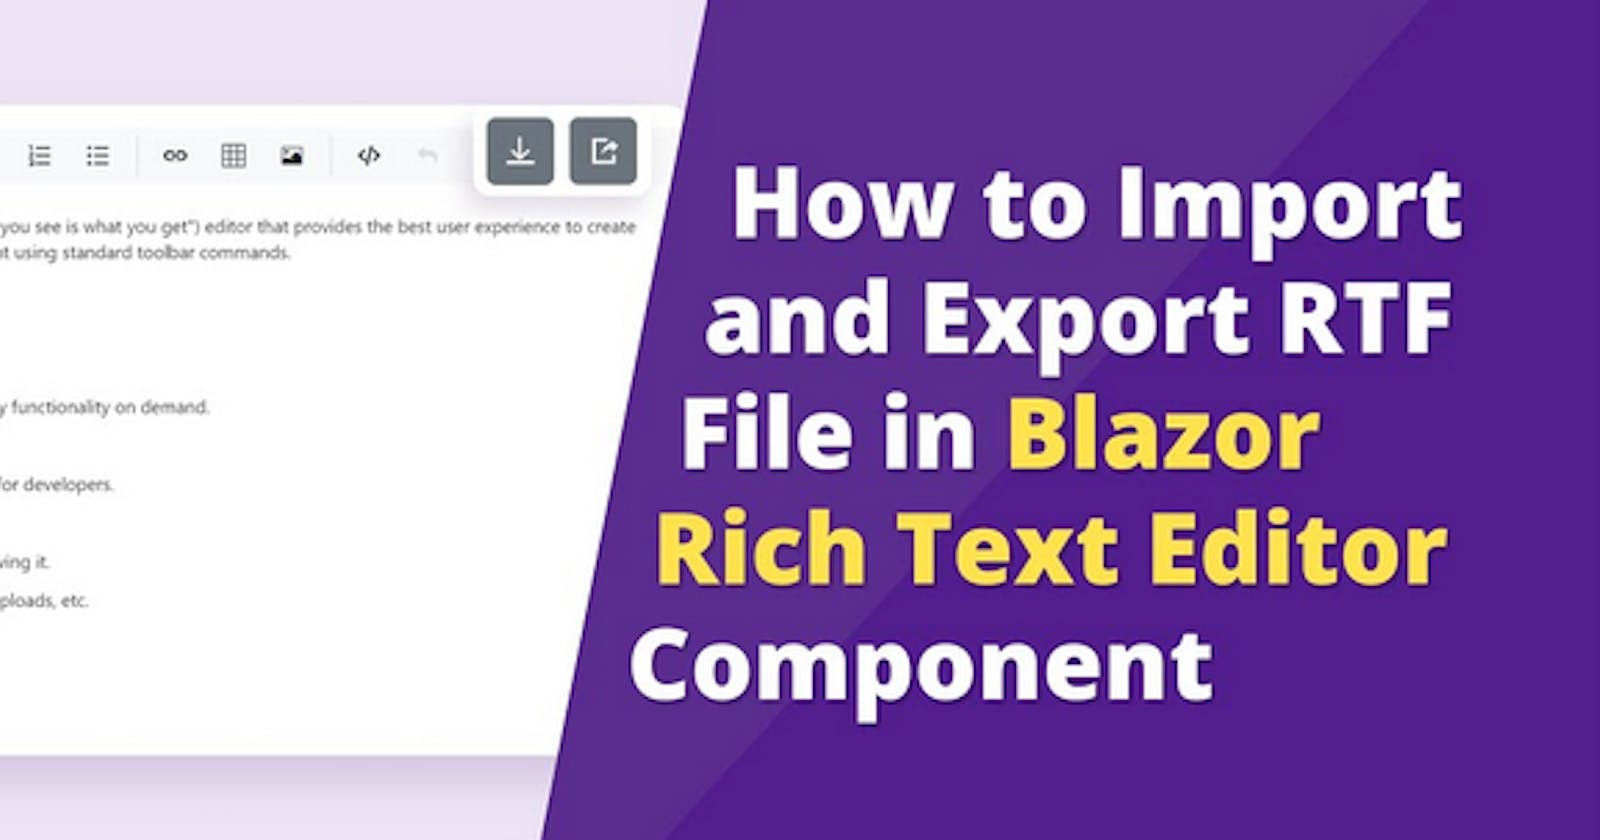 How to Import and Export RTF File in Blazor Rich Text Editor Component